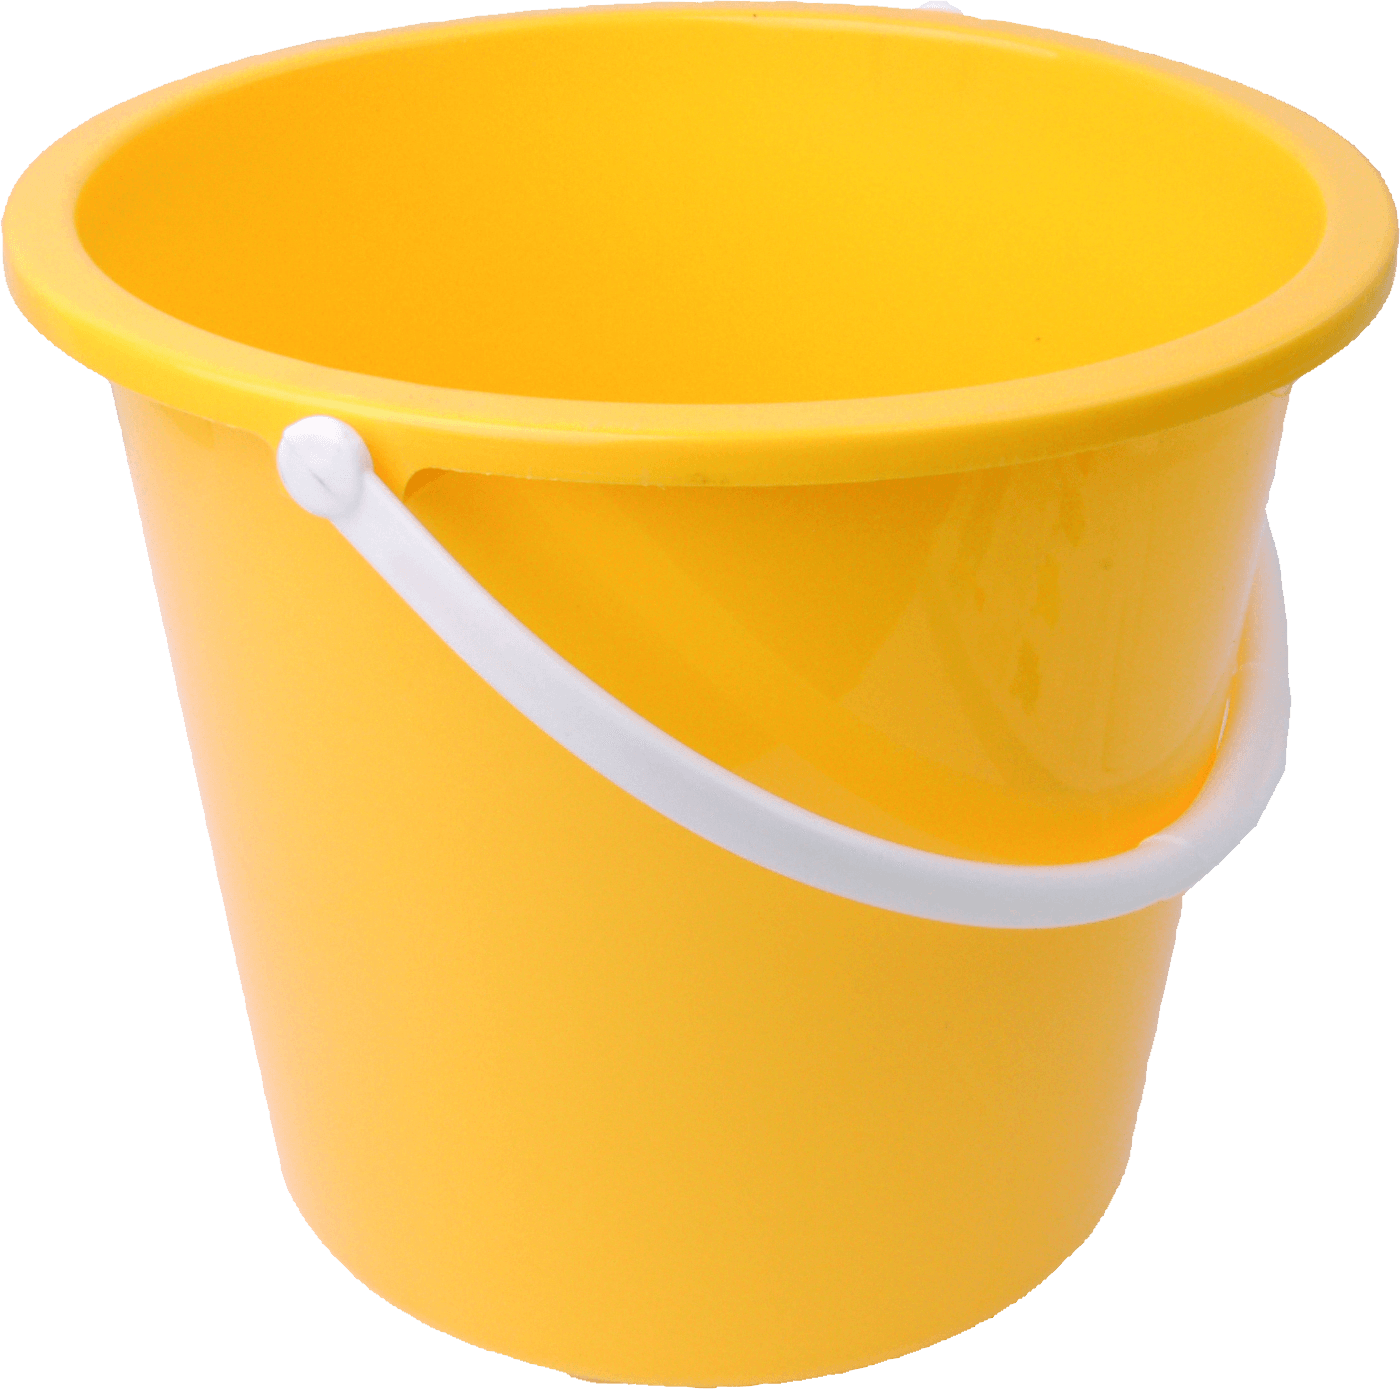 Plastic Yellow Bucket Png Image Download PNG Image